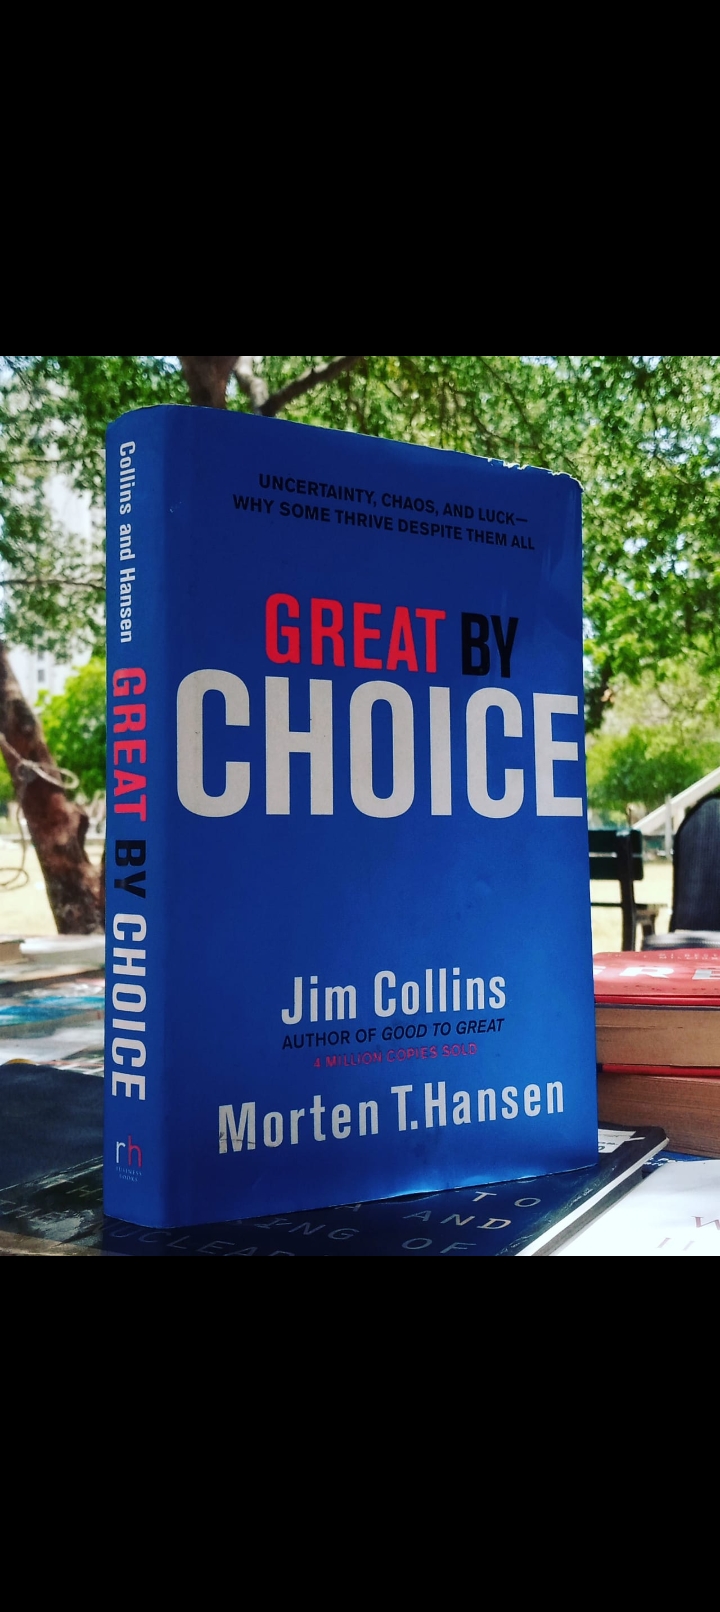 great by choice by jim collins. original hardcover